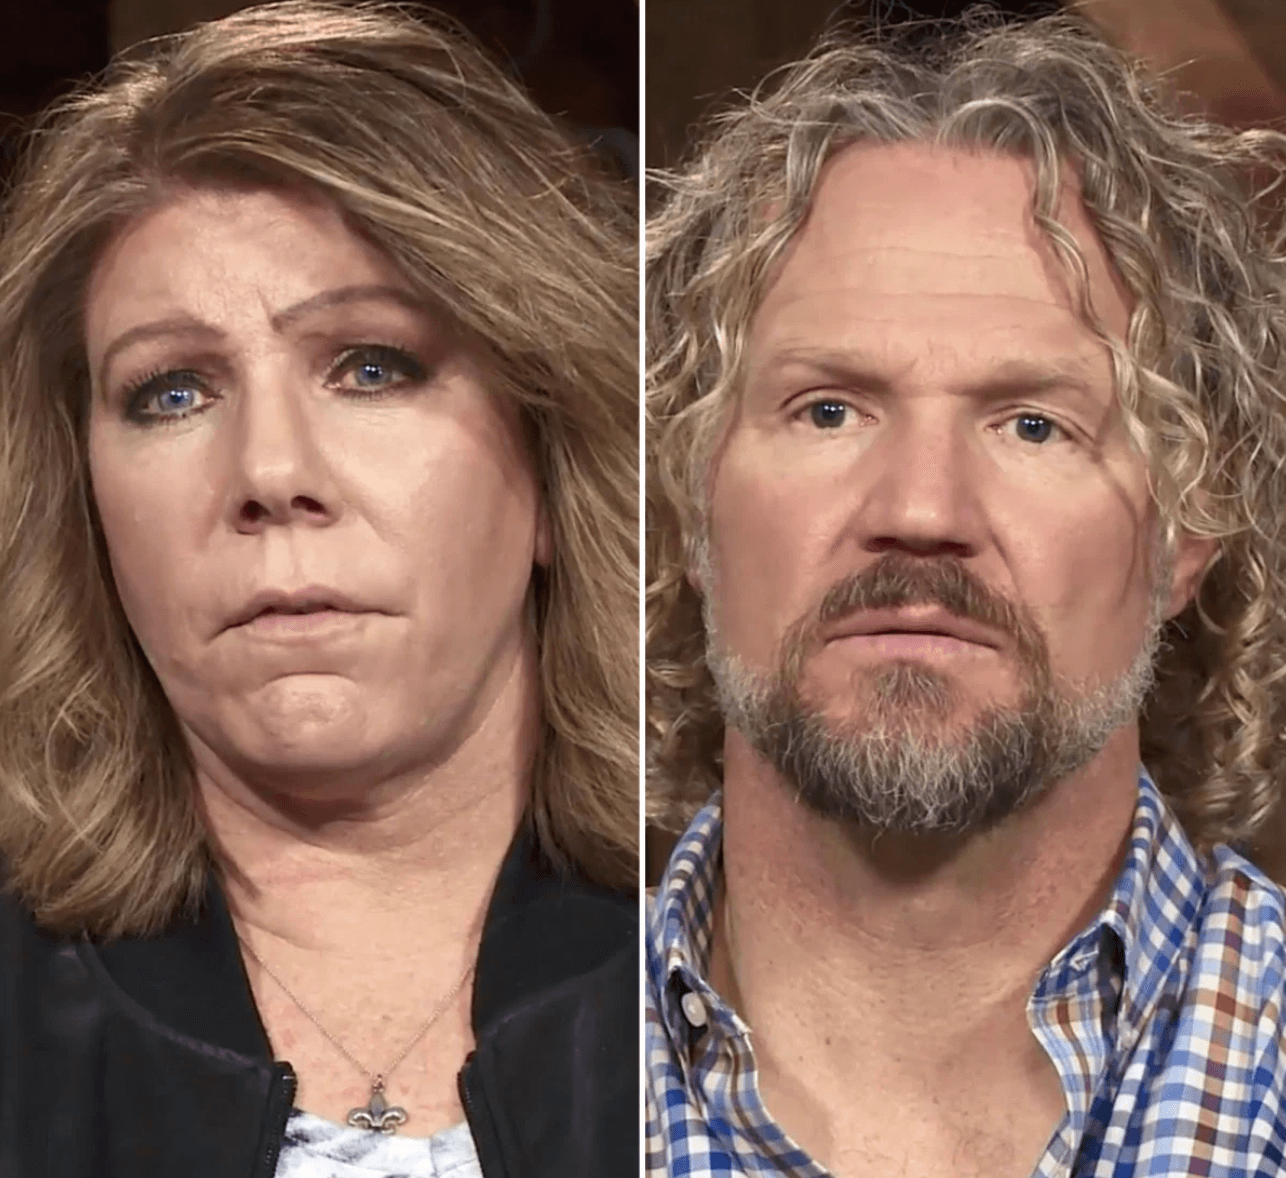 RECAP: ‘Sister Wives’ Meri Brown Says Relationship With Kody Is ‘Dead’ and ‘Over’ During Therapy